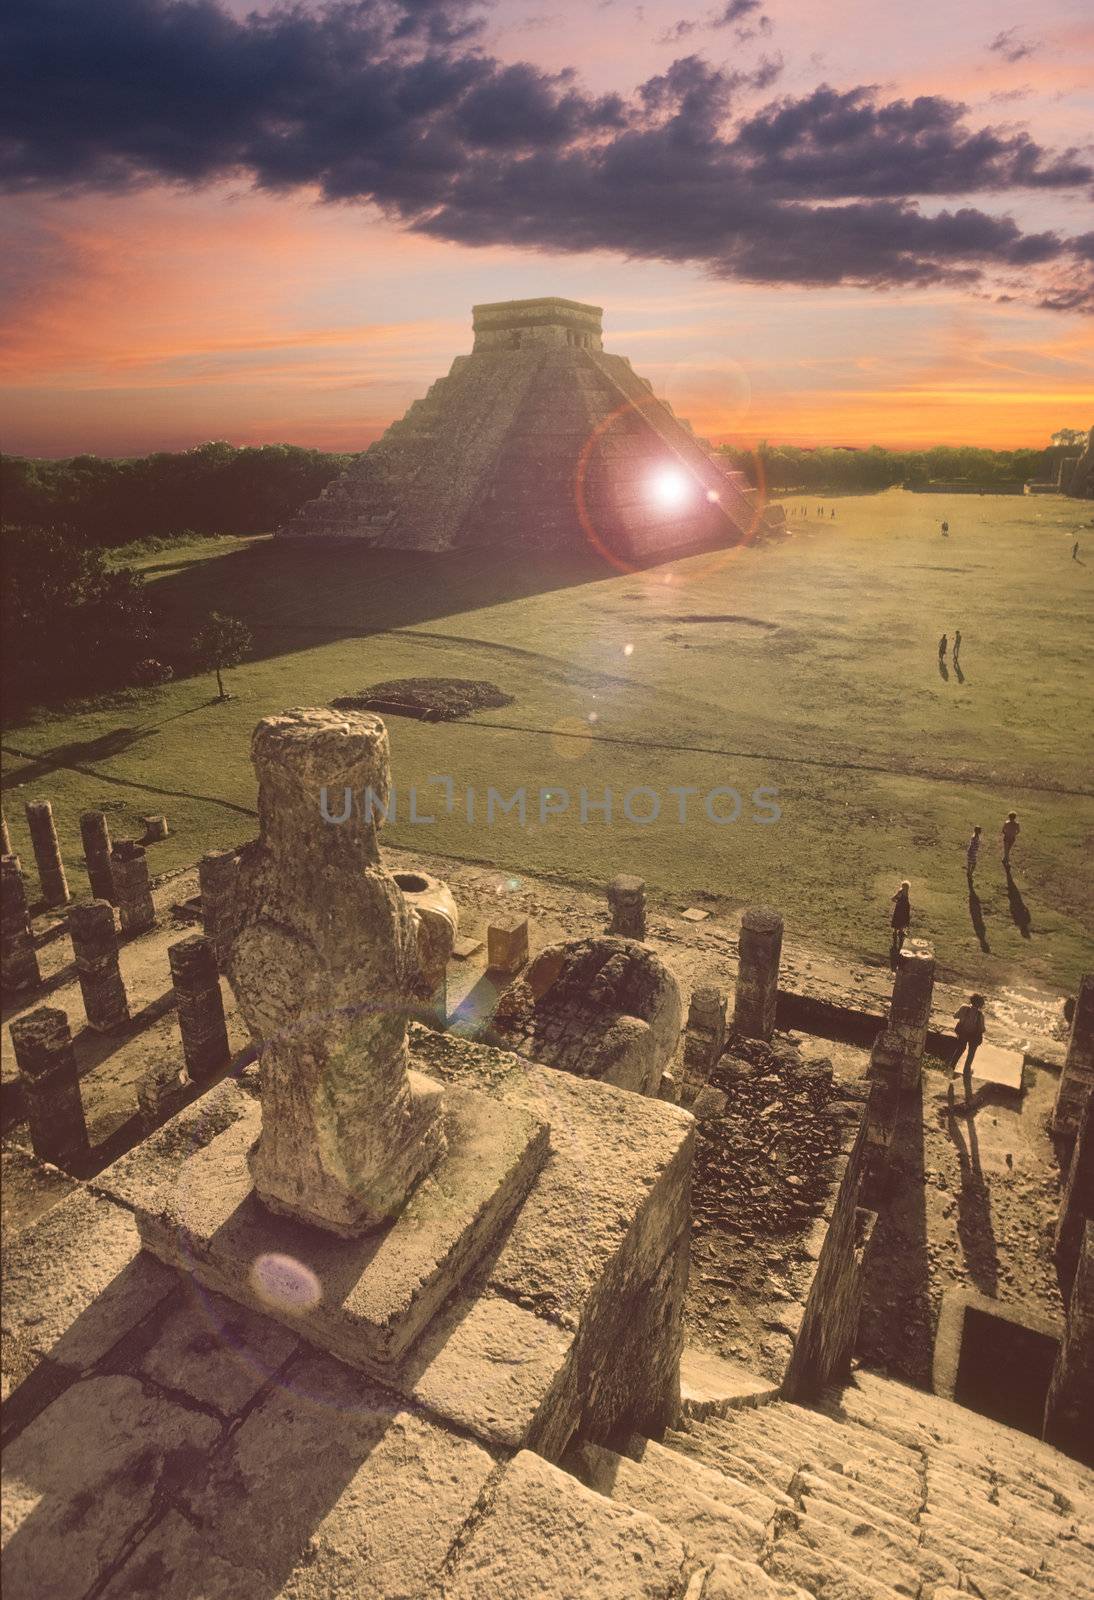 Sunset view of stepped pyramid temple of Chichen Itza, Mexico